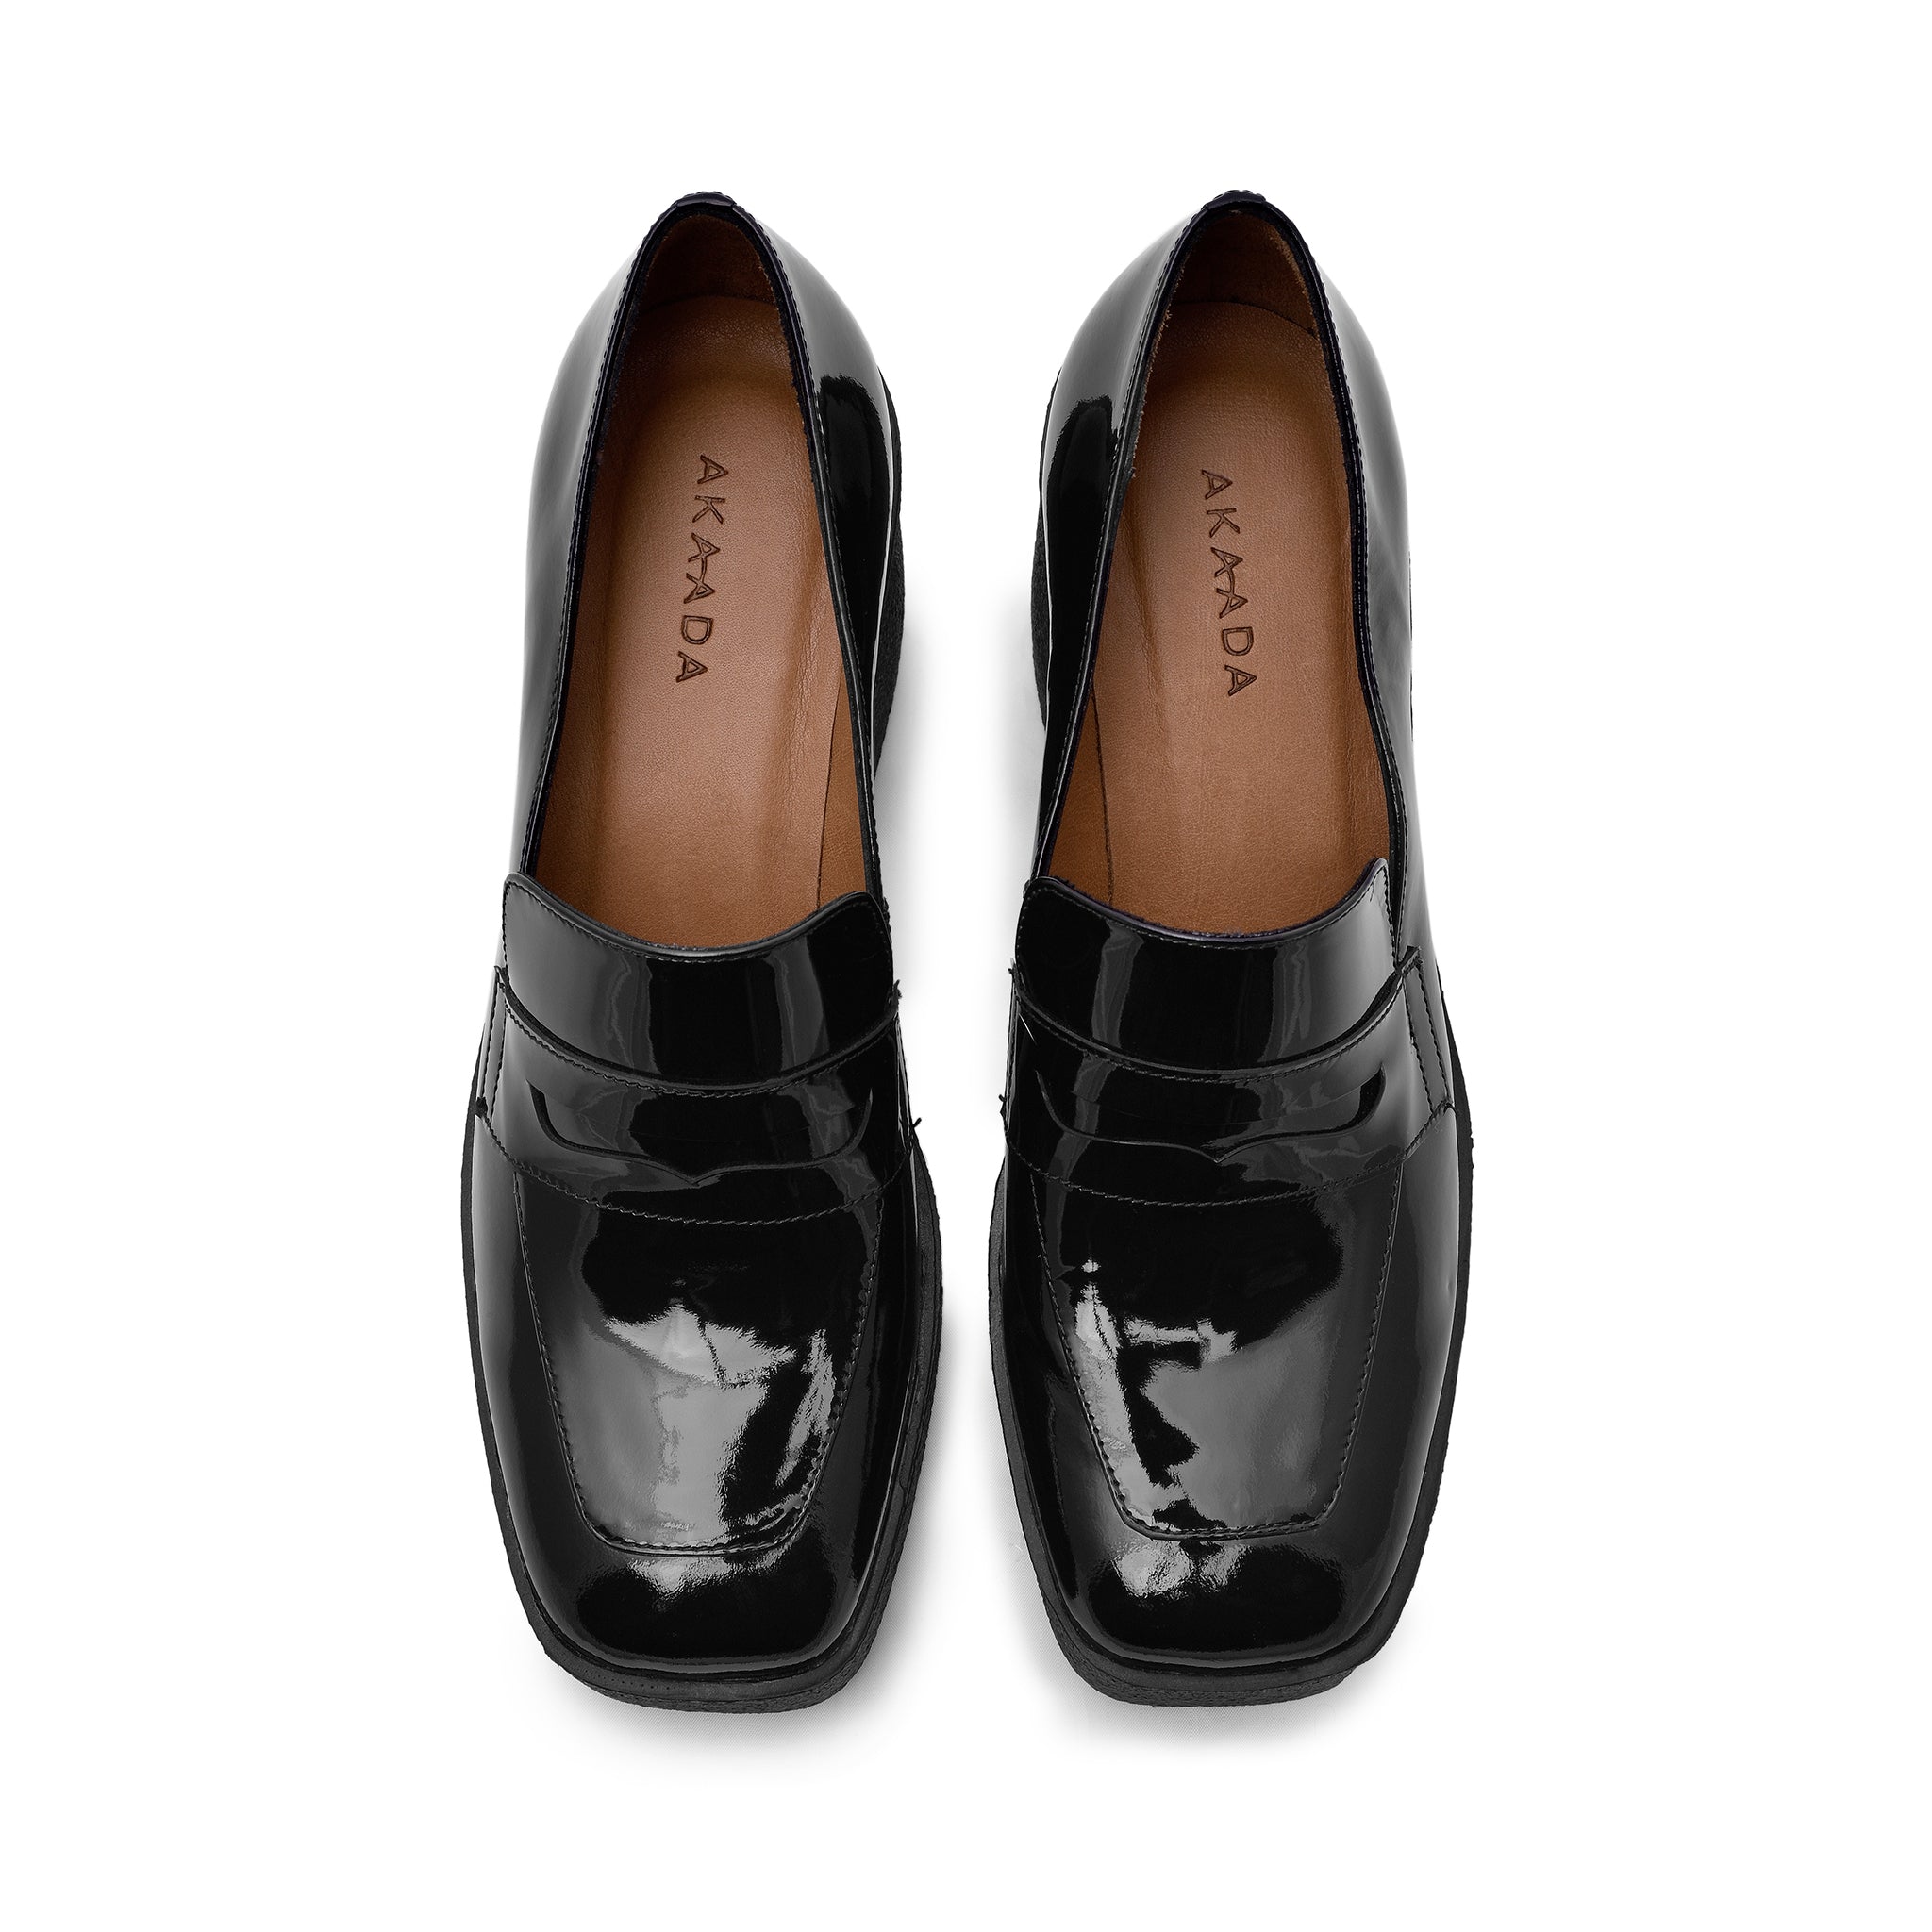 Yoko Black Patent Leather Chunky Loafers 21031-01-02 - 4